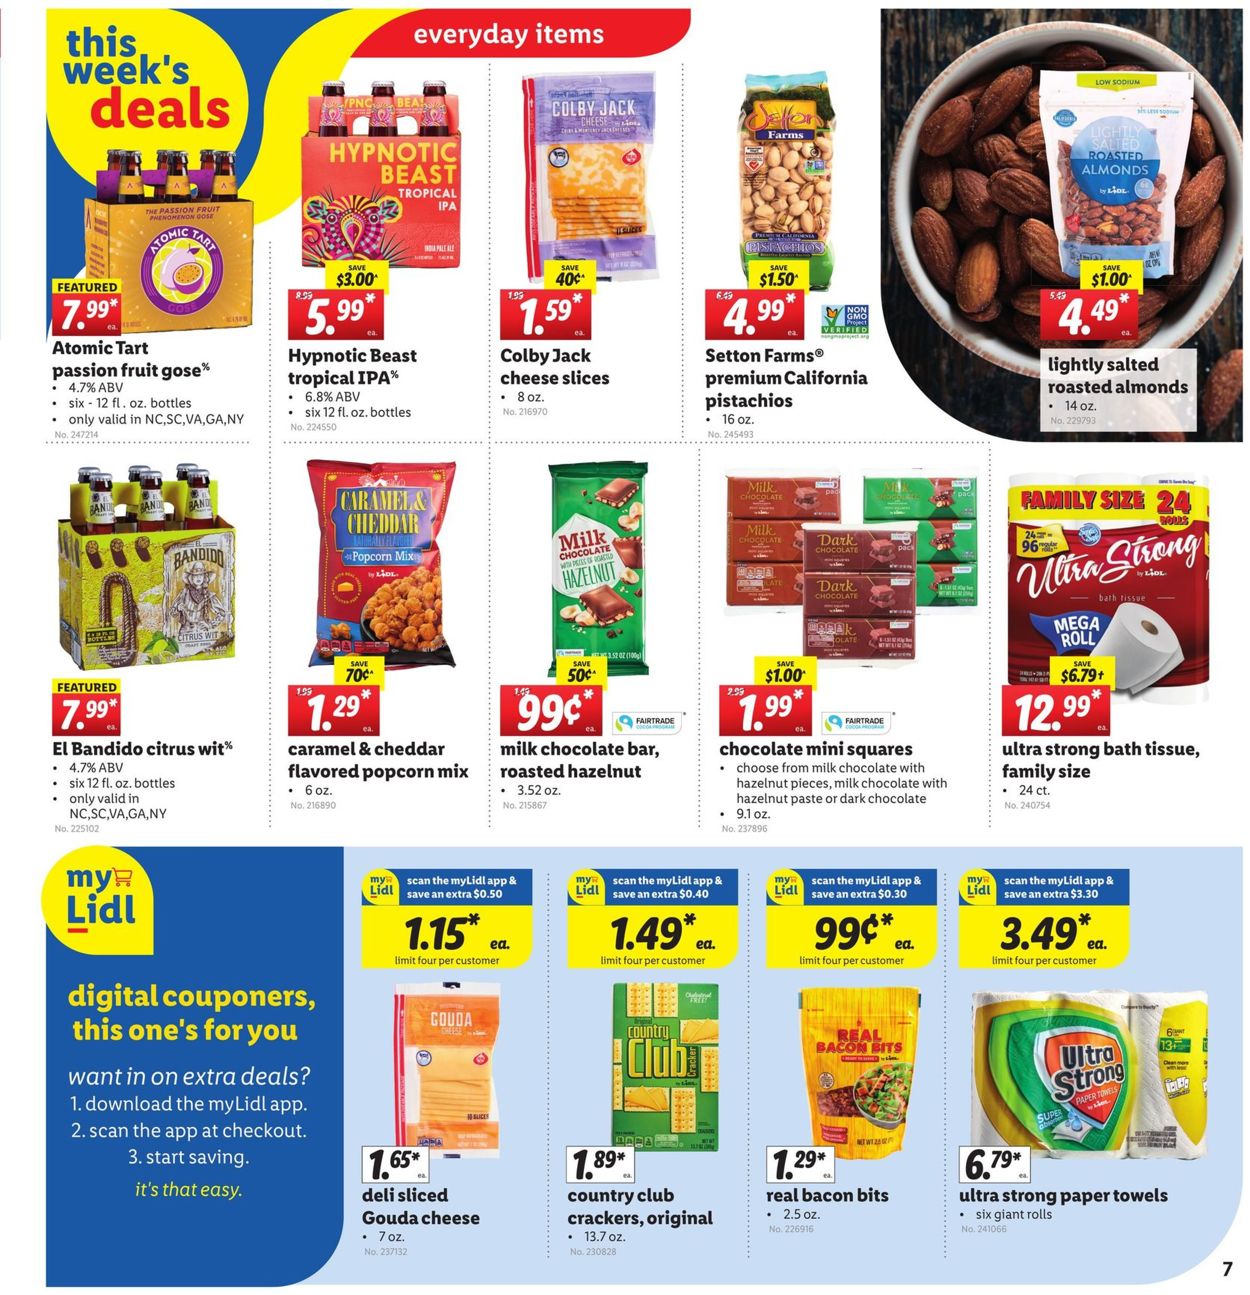 Catalogue Lidl from 06/09/2021